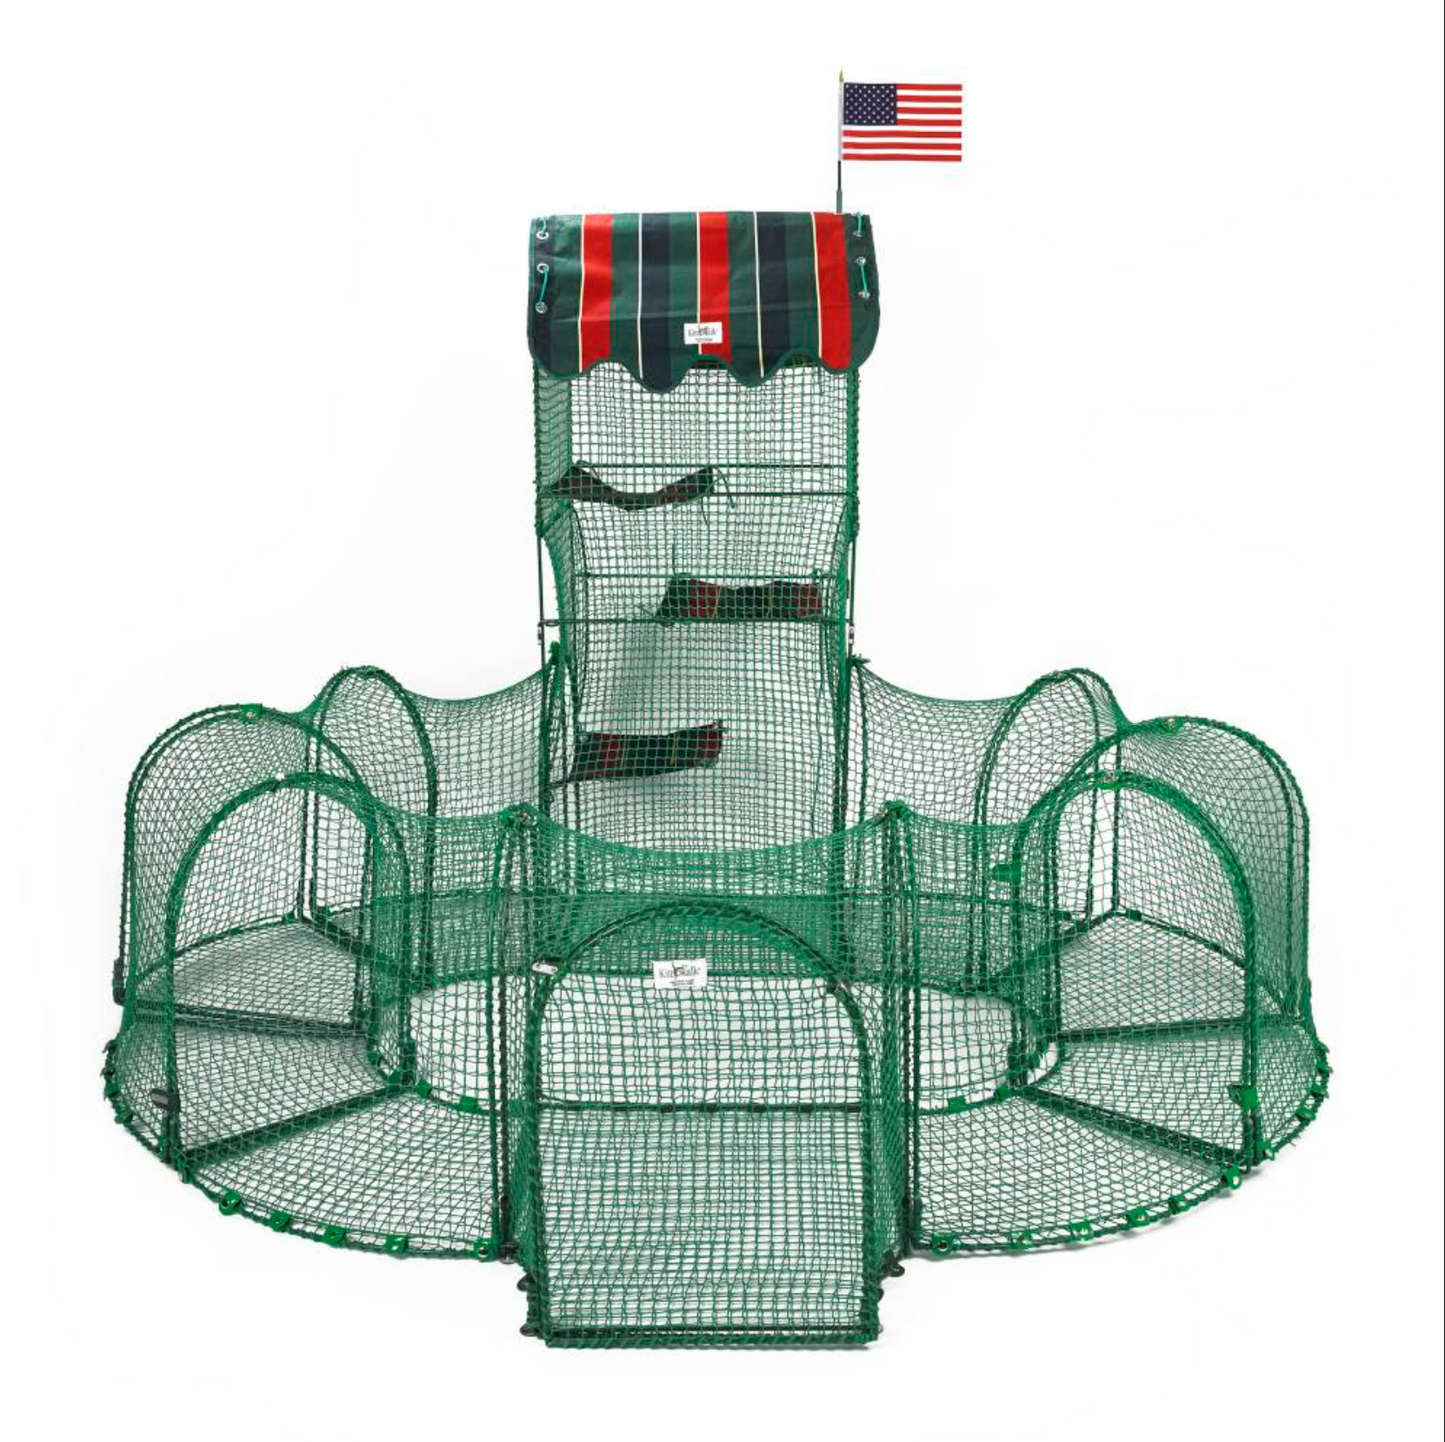 Kittywalk Grand Prix Outdoor Cat Enclosure. Ships in 4 packages